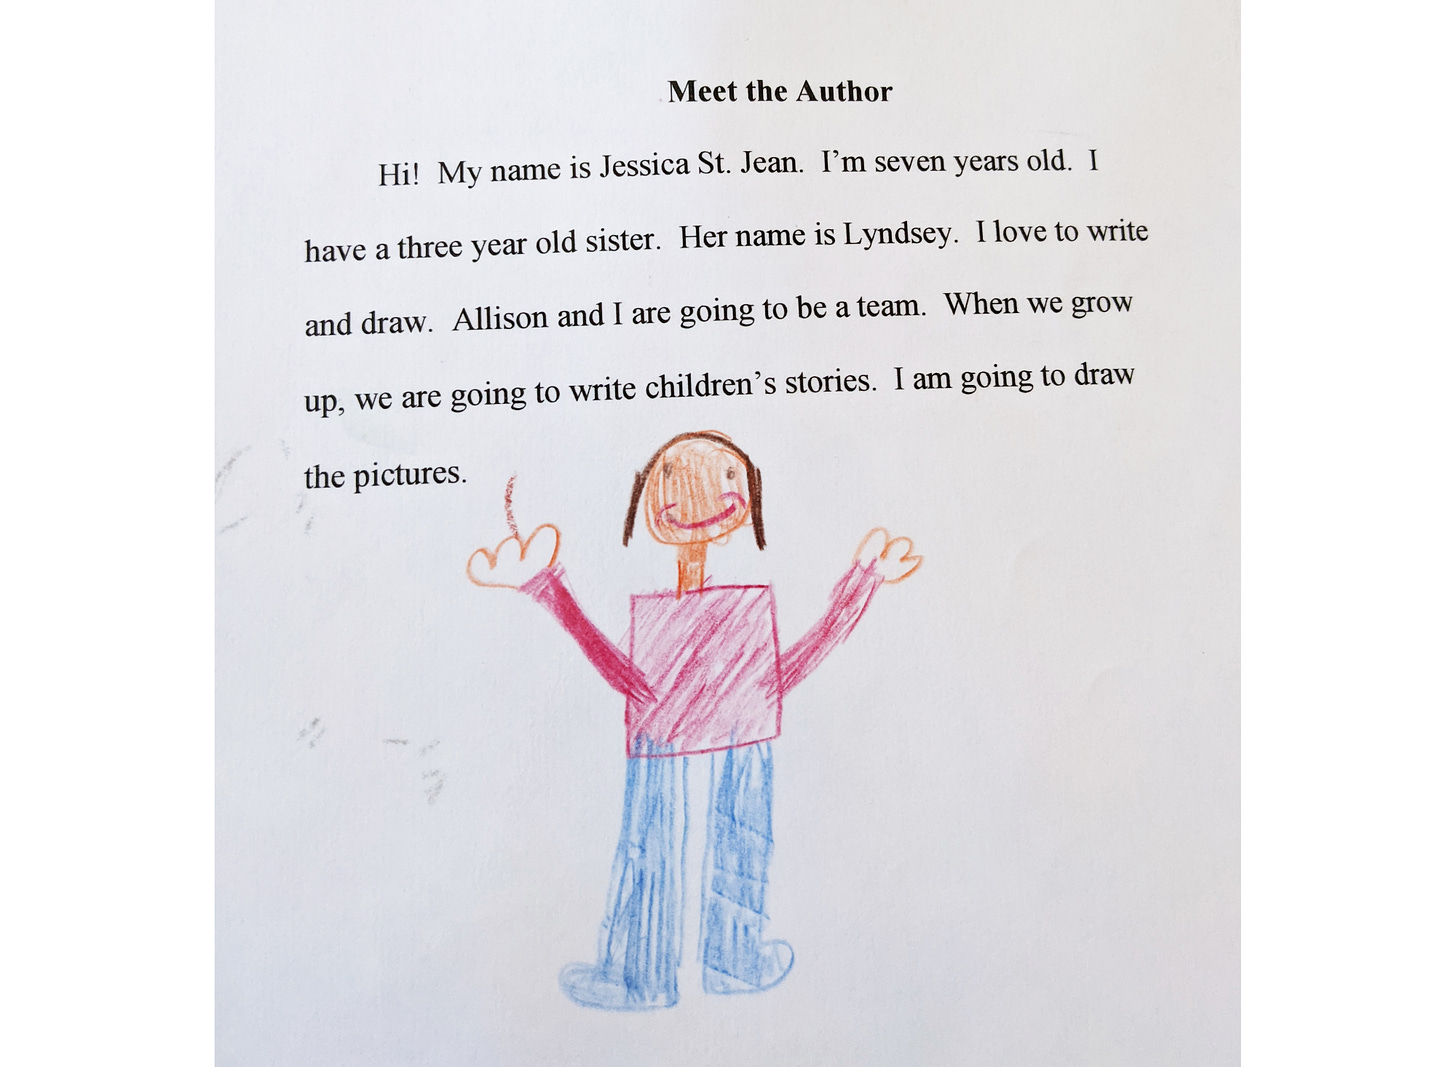 A child's self-portrait below text that reads: Meet the Author. Hi! My name is Jessica Saint Jean. I'm seven years old. I have a three year old sister. Her name is Lyndsey. I love to write and draw. Alison and I are going to be a team. When we grow up, we are going to write children's stories. I am going to draw the pictures. 